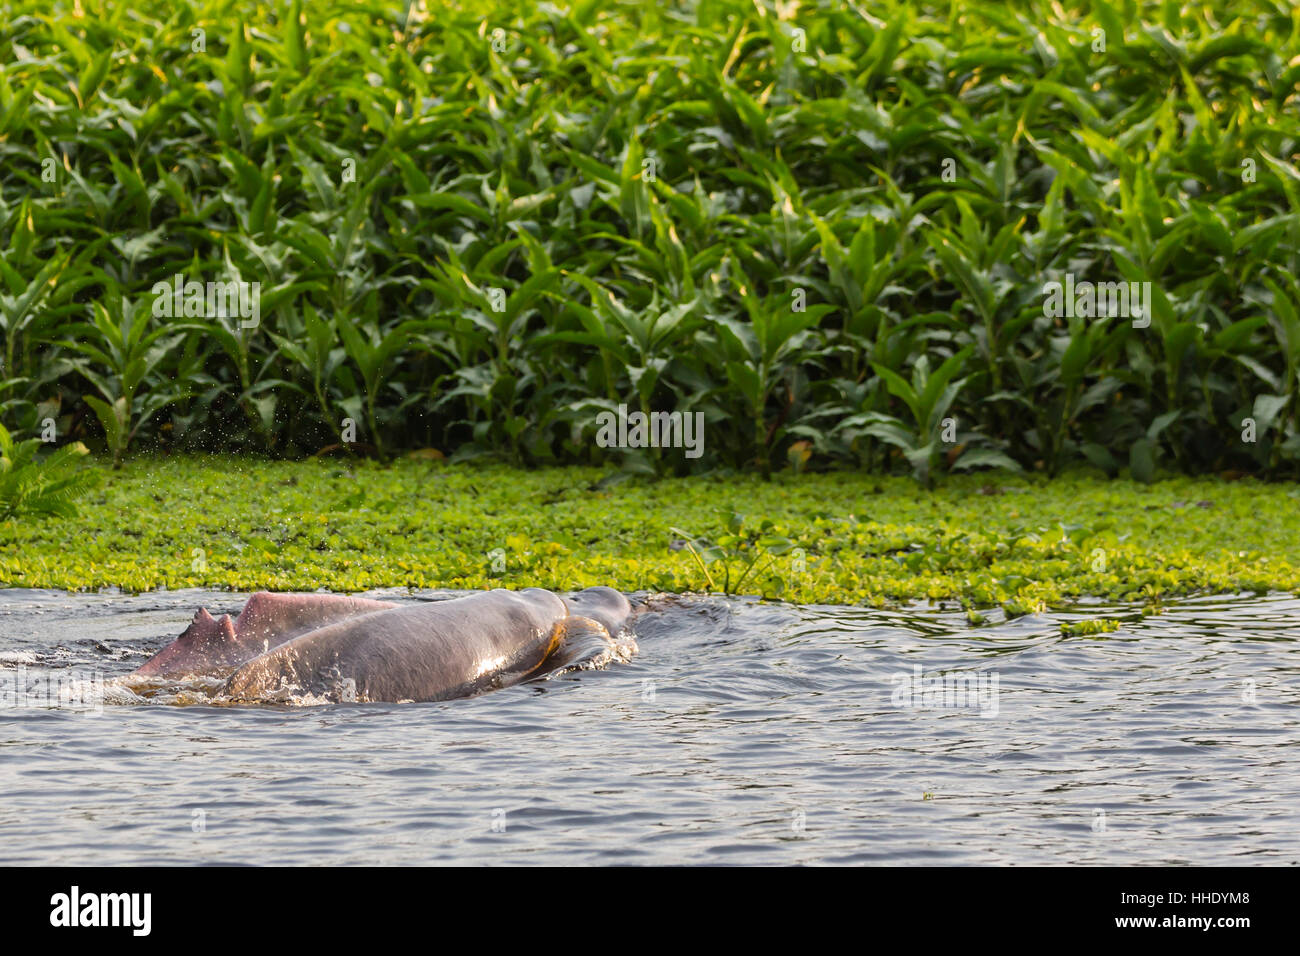 Adult Amazon pink river dolphins (Inia geoffrensis) surfacing on the Pacaya River, Loreto, Peru Stock Photo